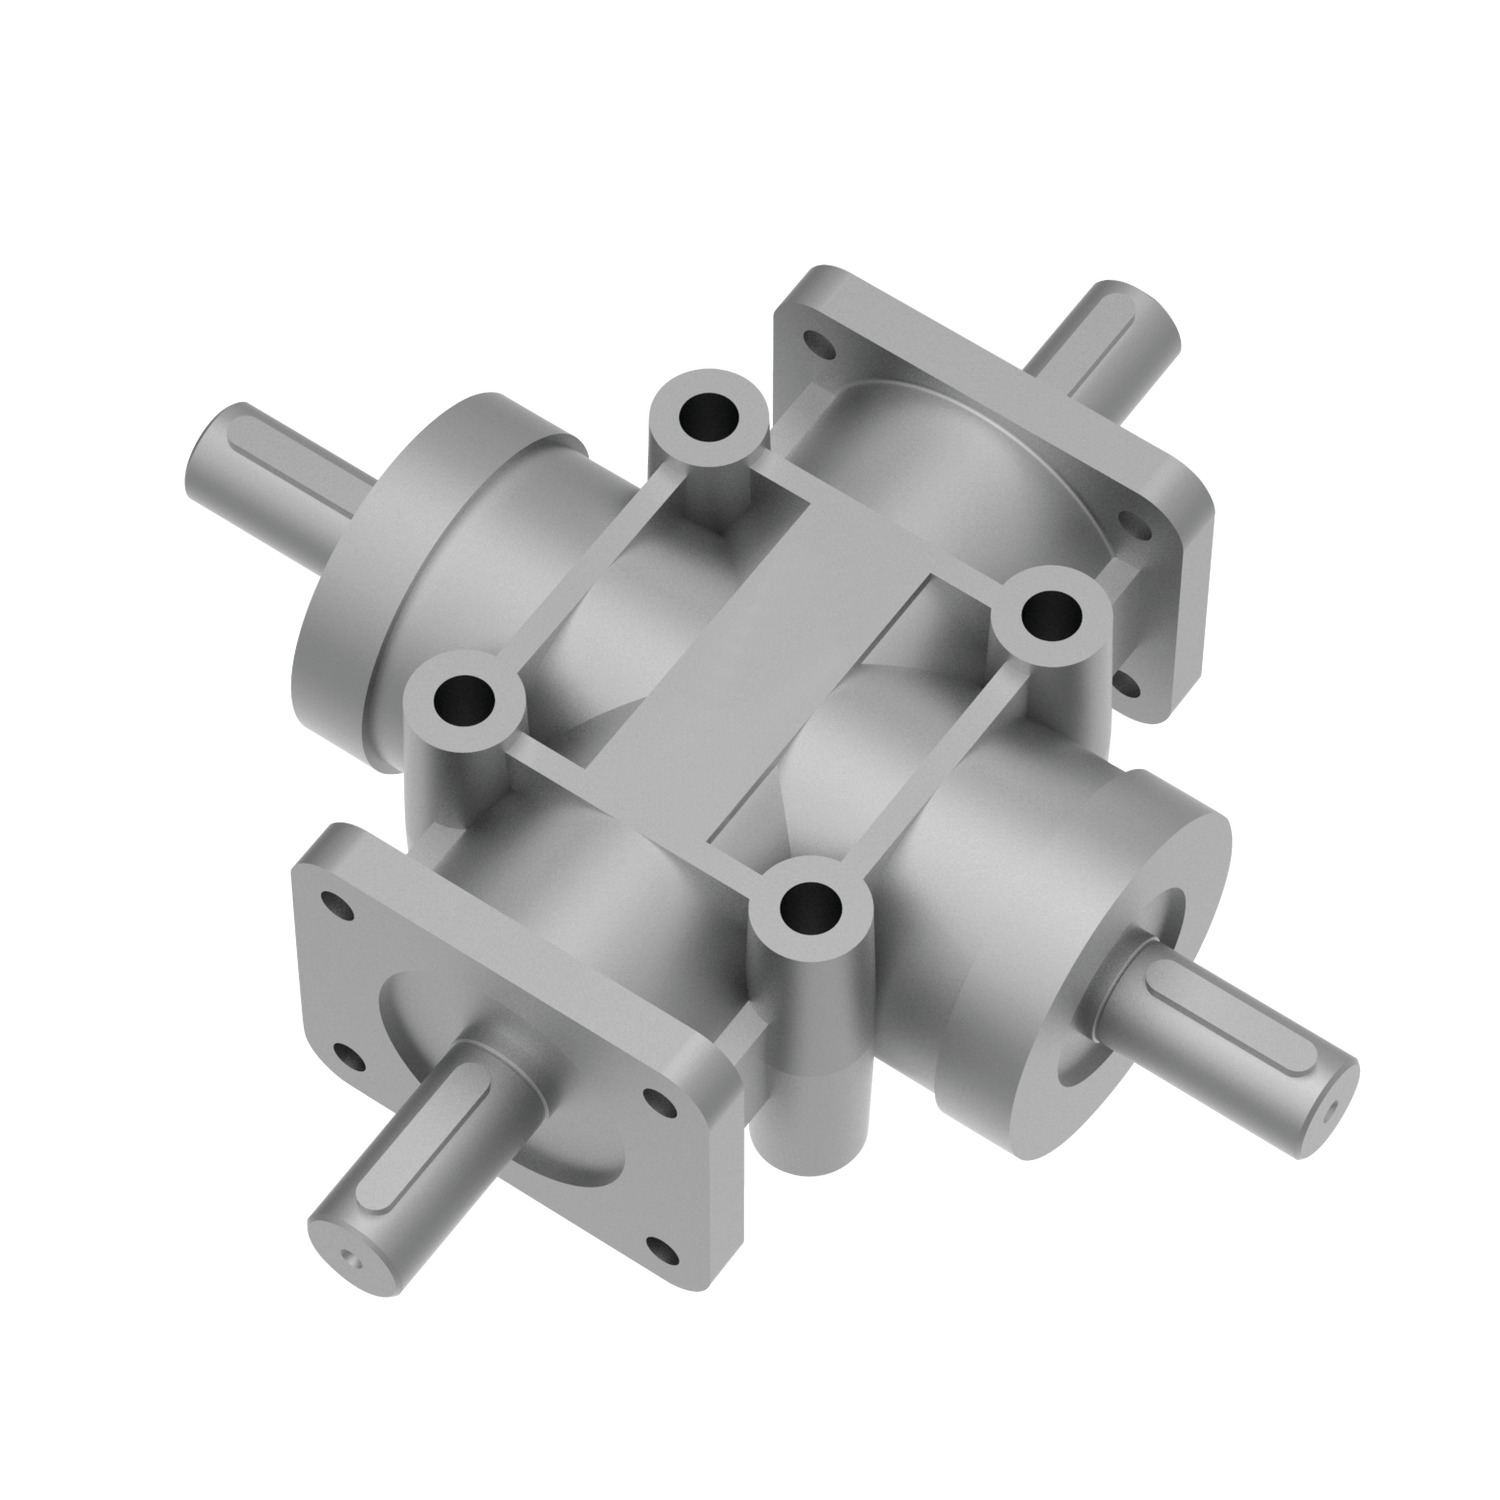 R2345 - Right Angle Drives - 4 Shafts